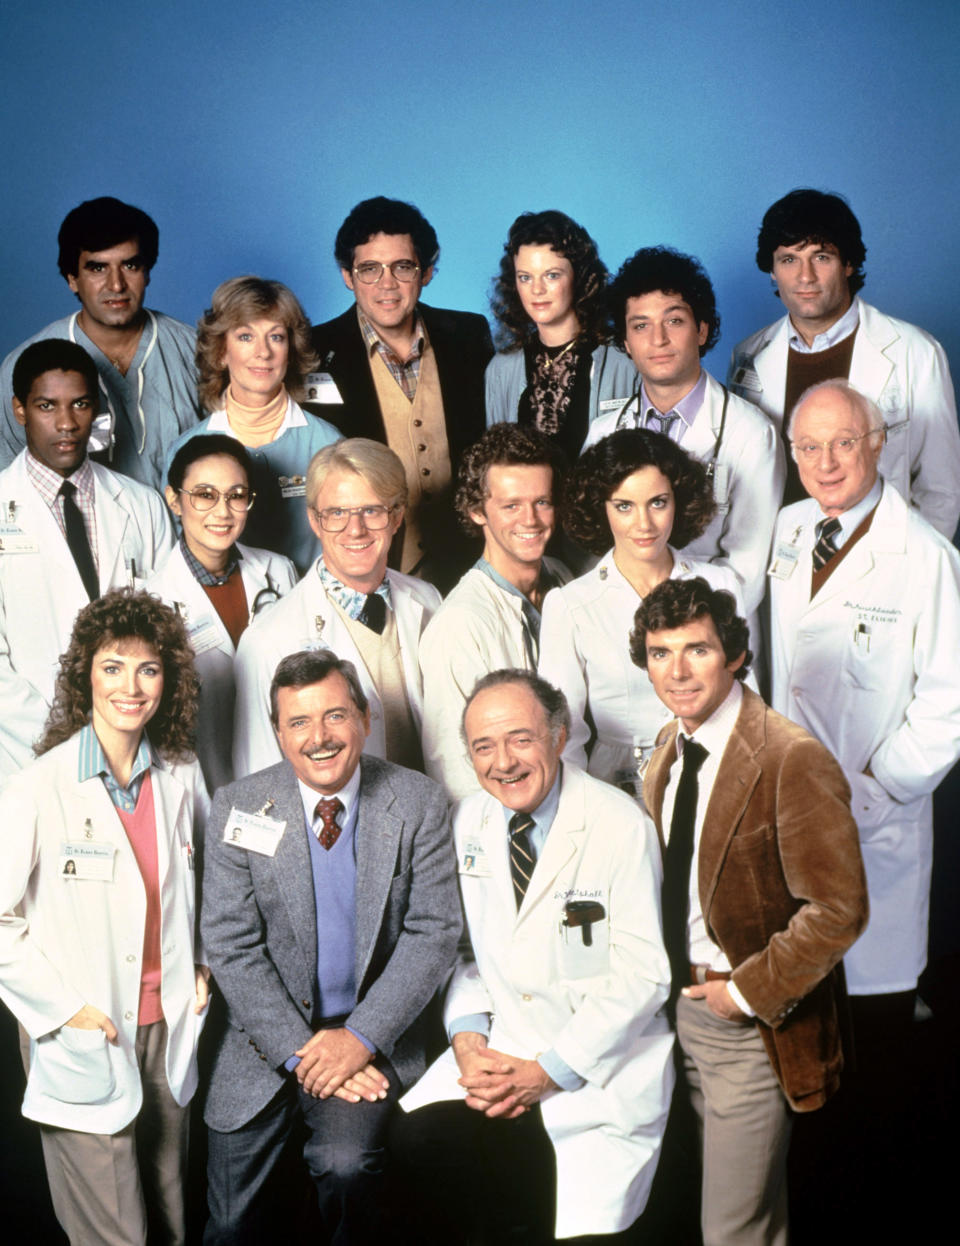 The cast of ‘St. Elsewhere’ (Birney at bottom right, 1982) - Credit: Everett Collection